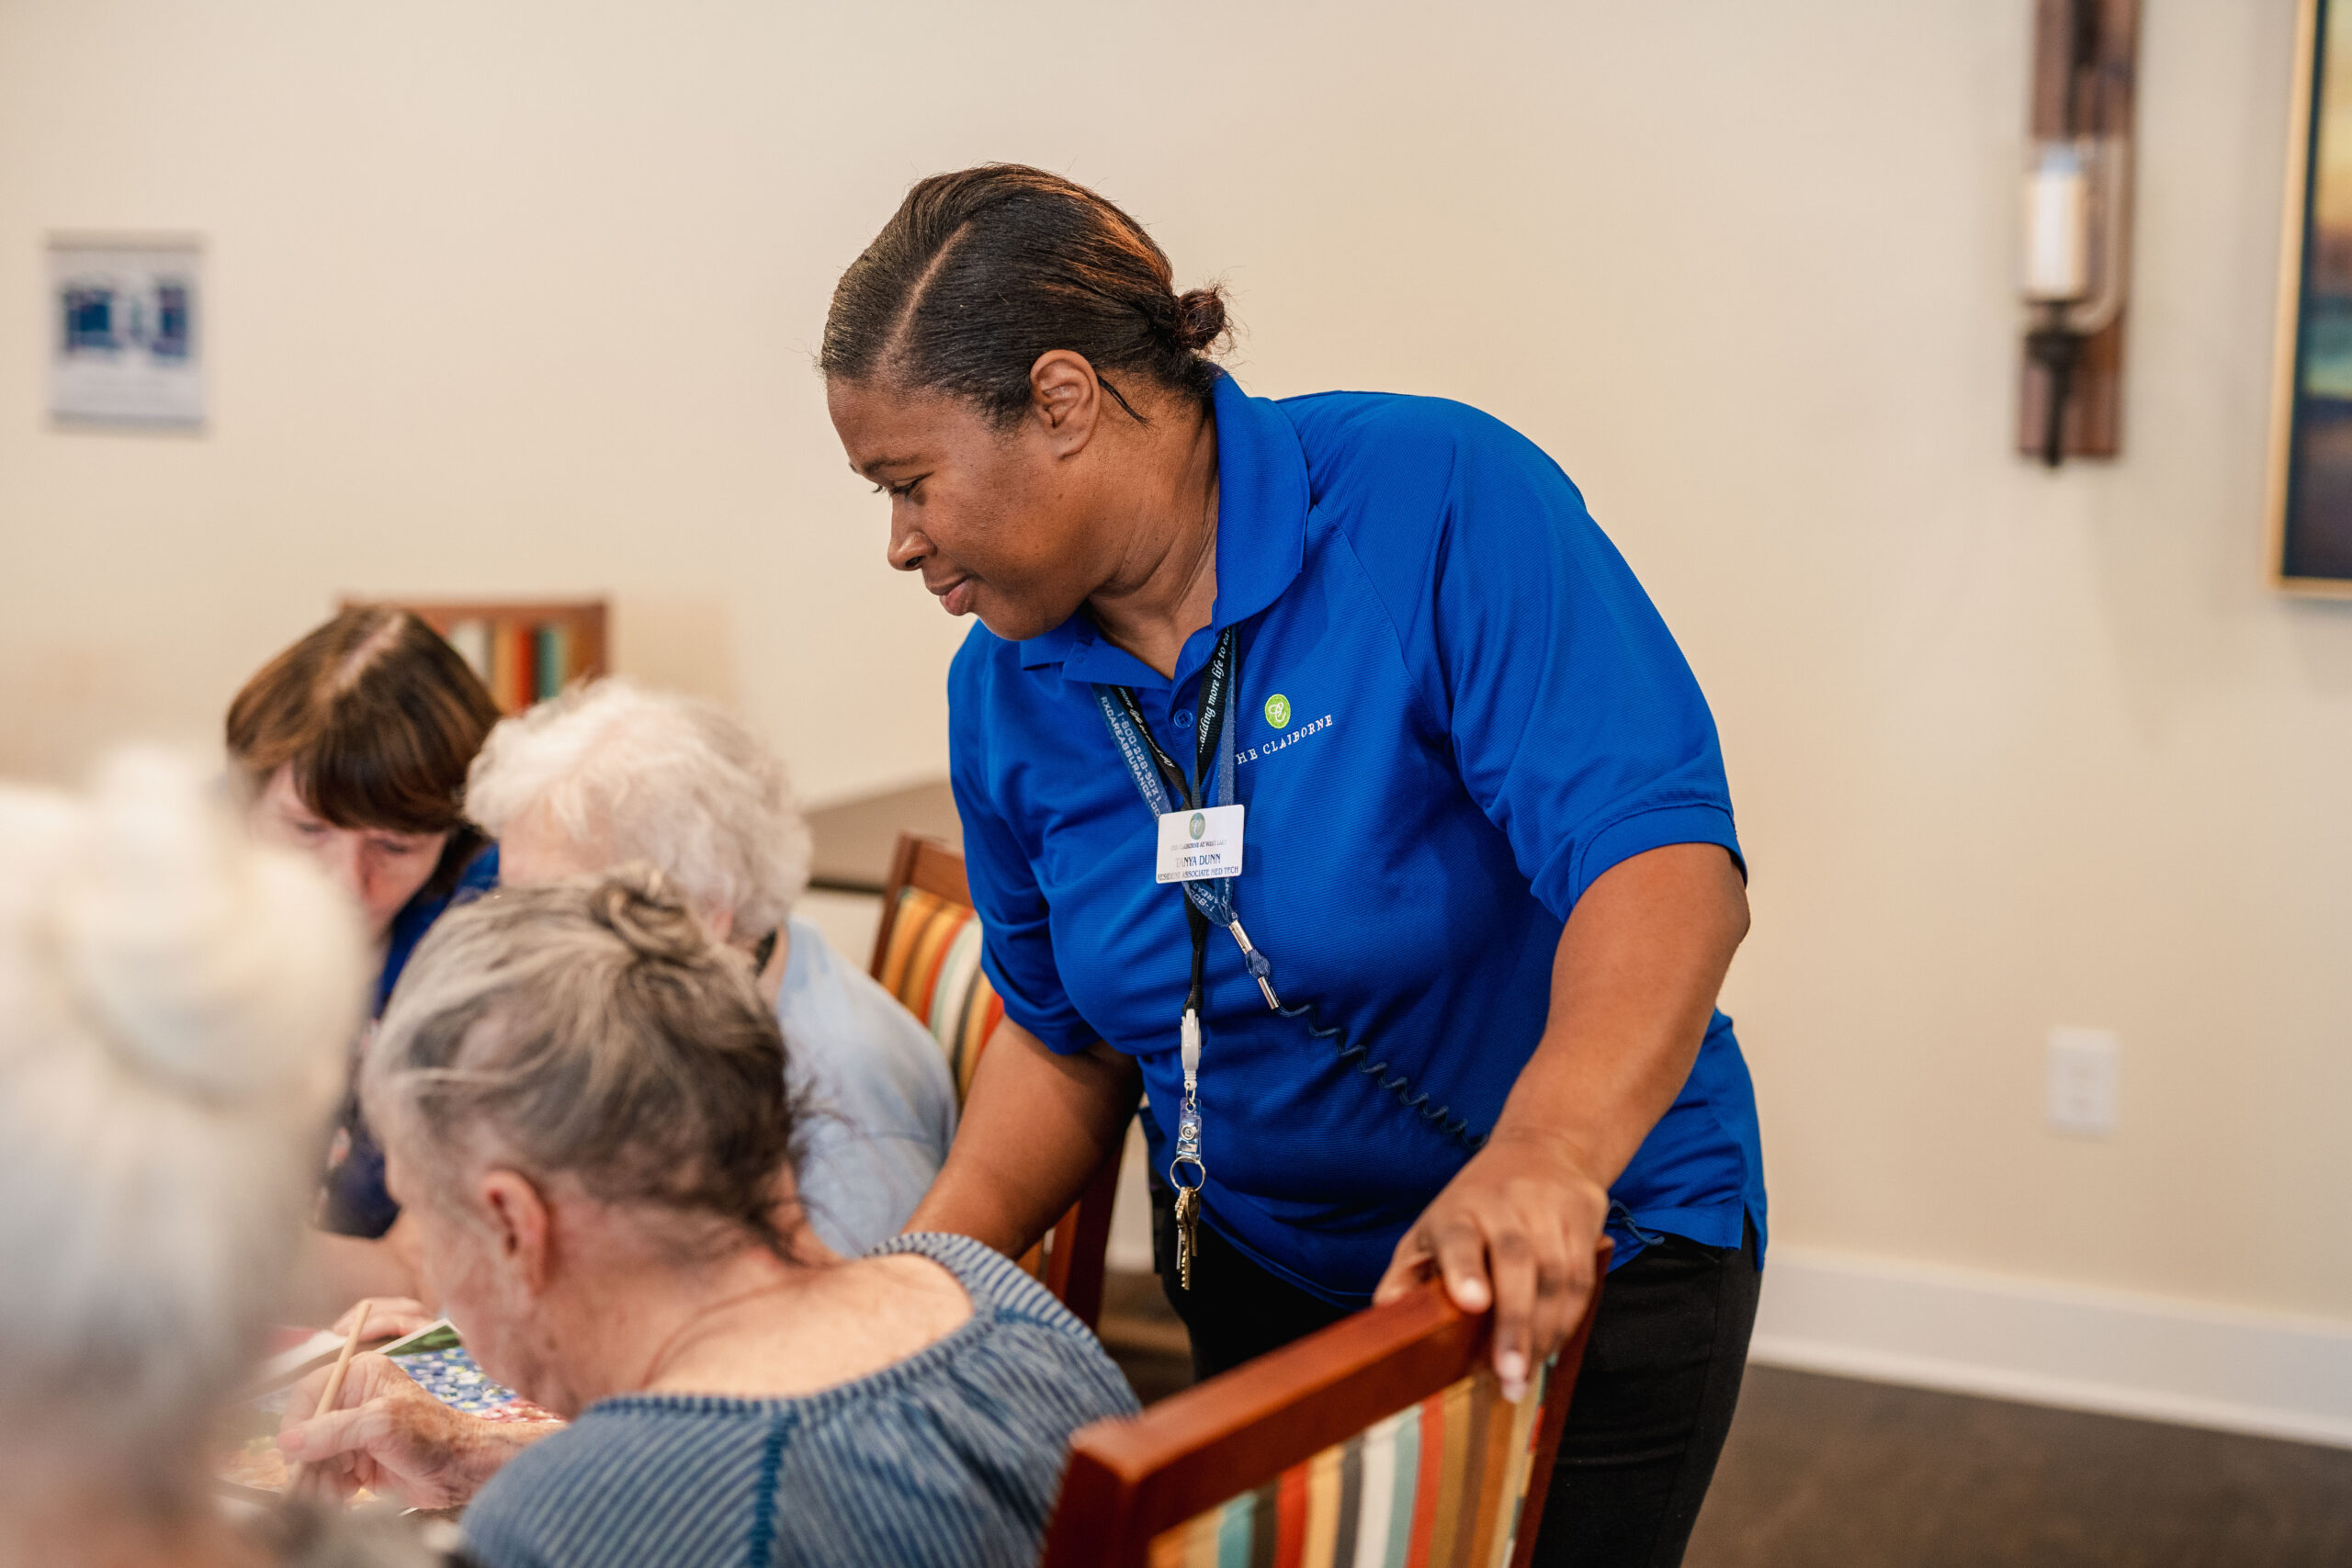 The Claiborne at Baton Rouge employee helping senior resident during activity